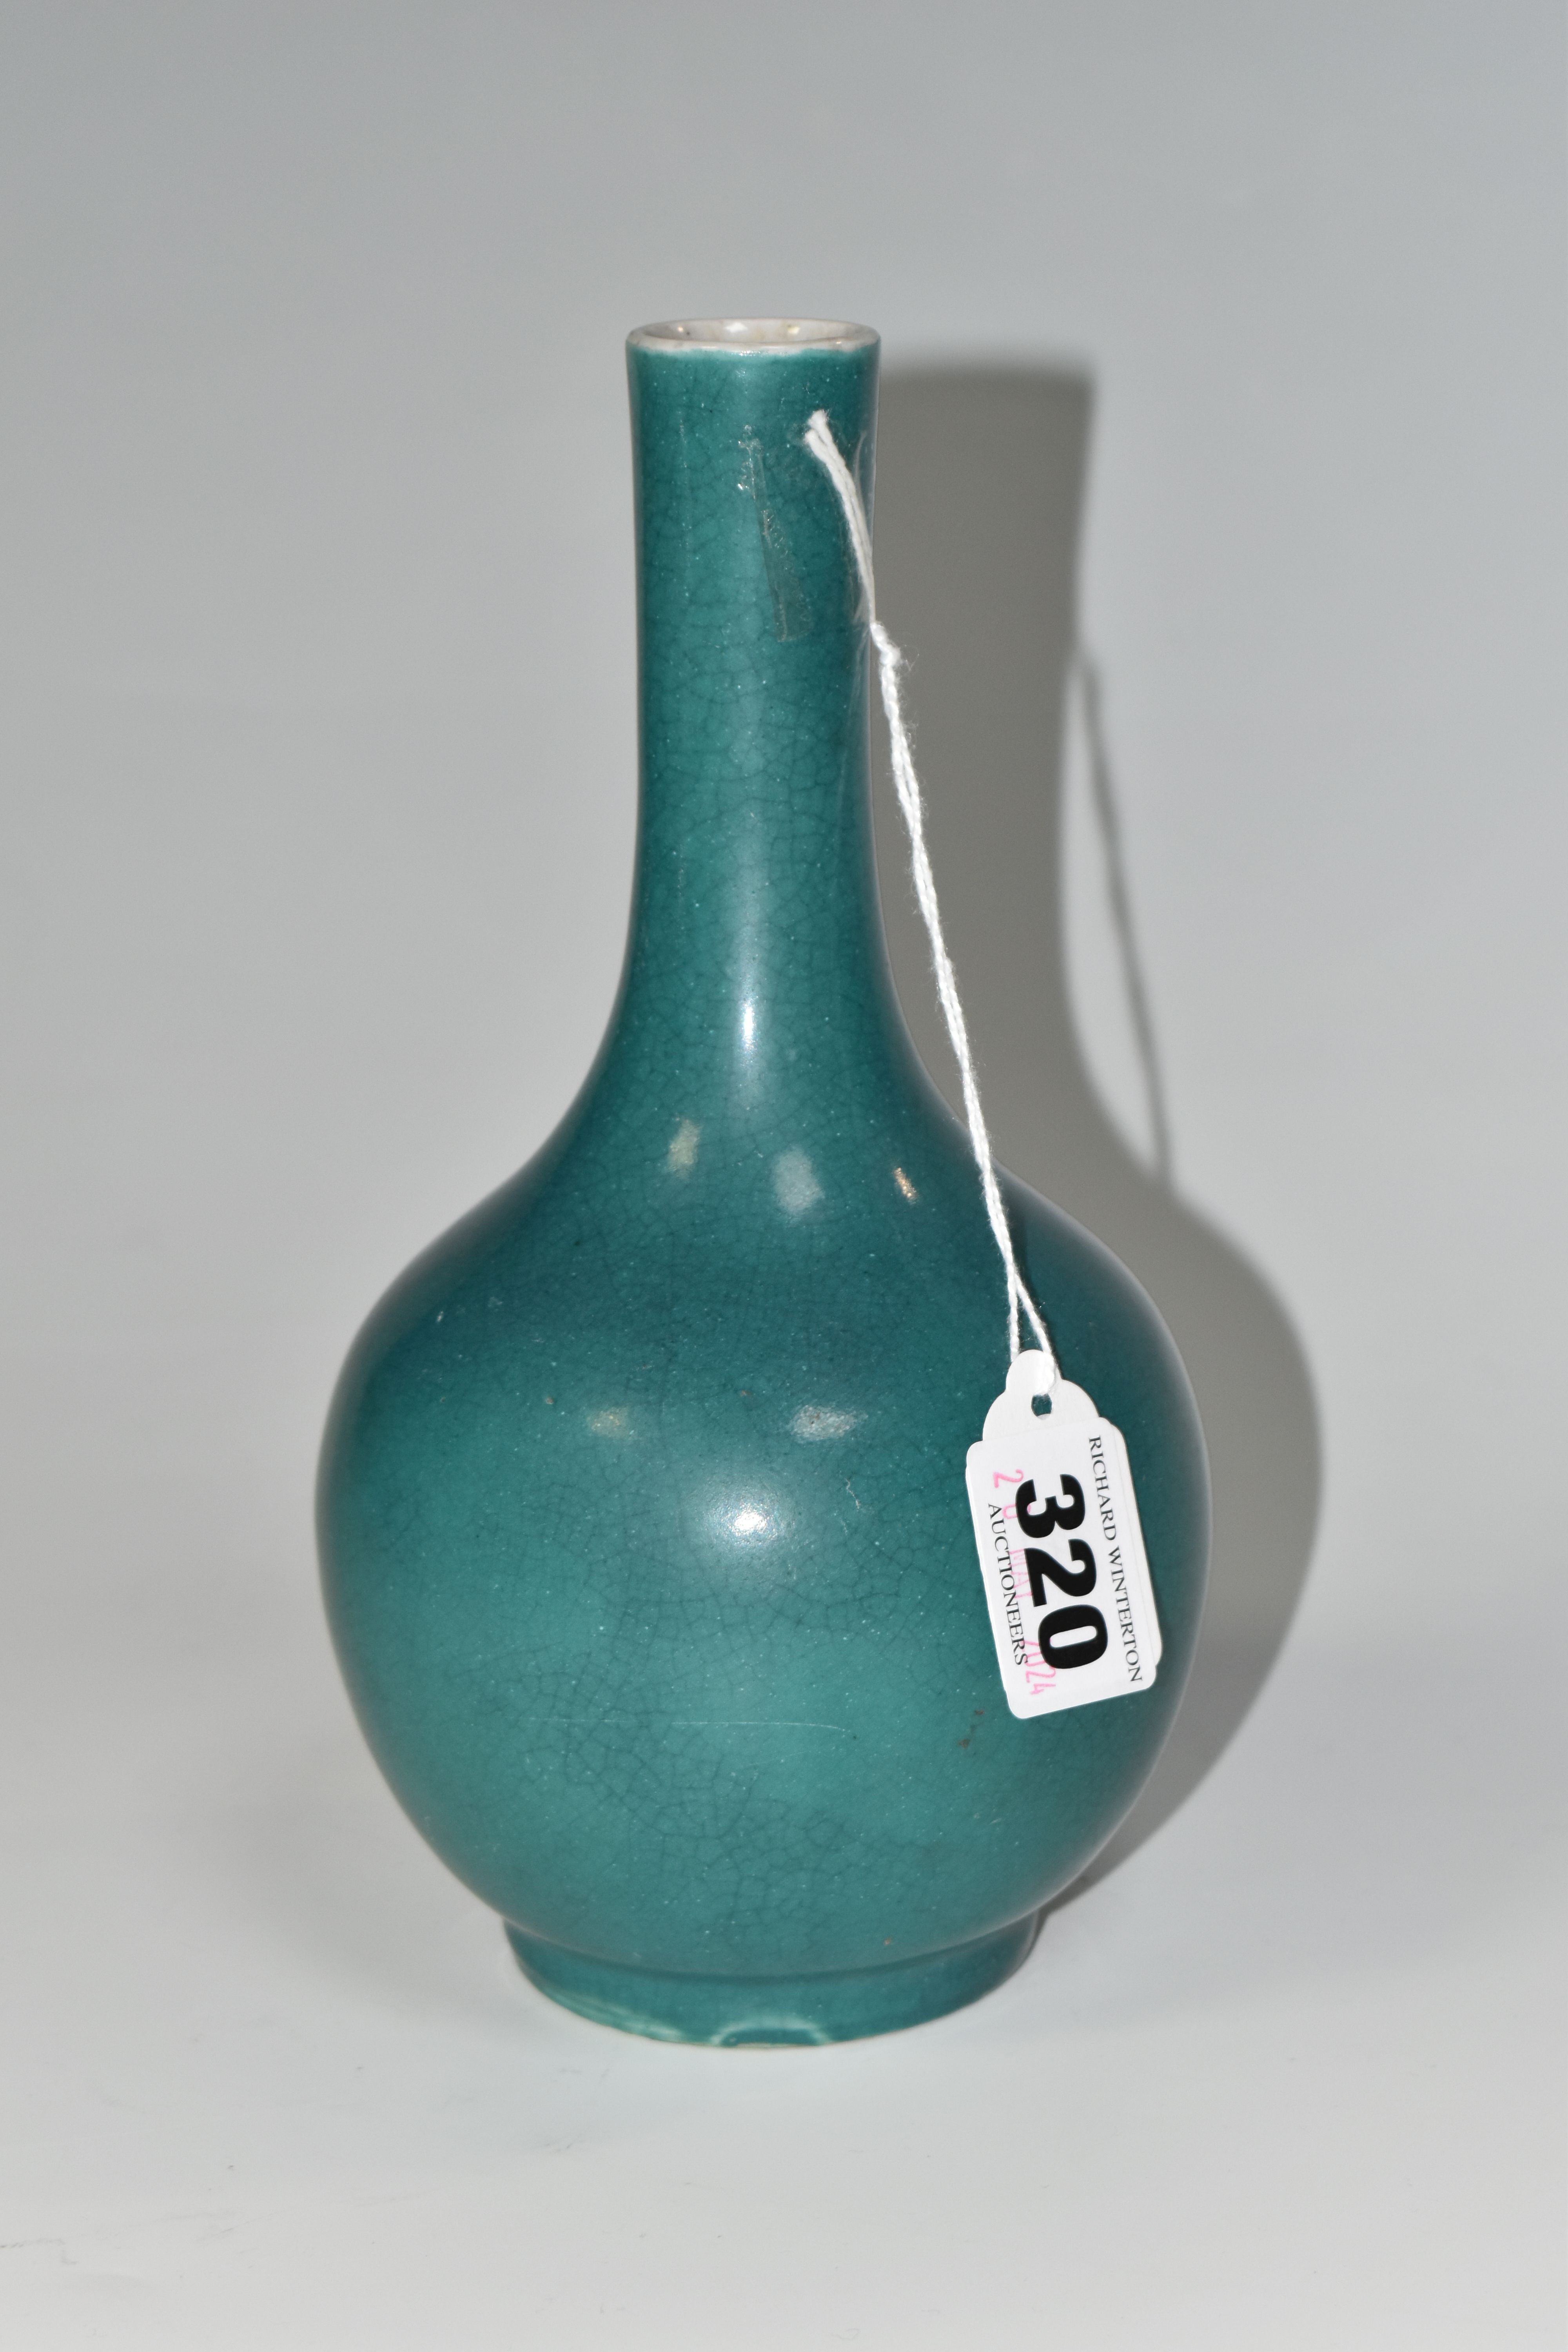 A NINETEENTH CENTURY CHINESE ONION SHAPED CRACKLE VASE, with turquoise glaze, four character marks